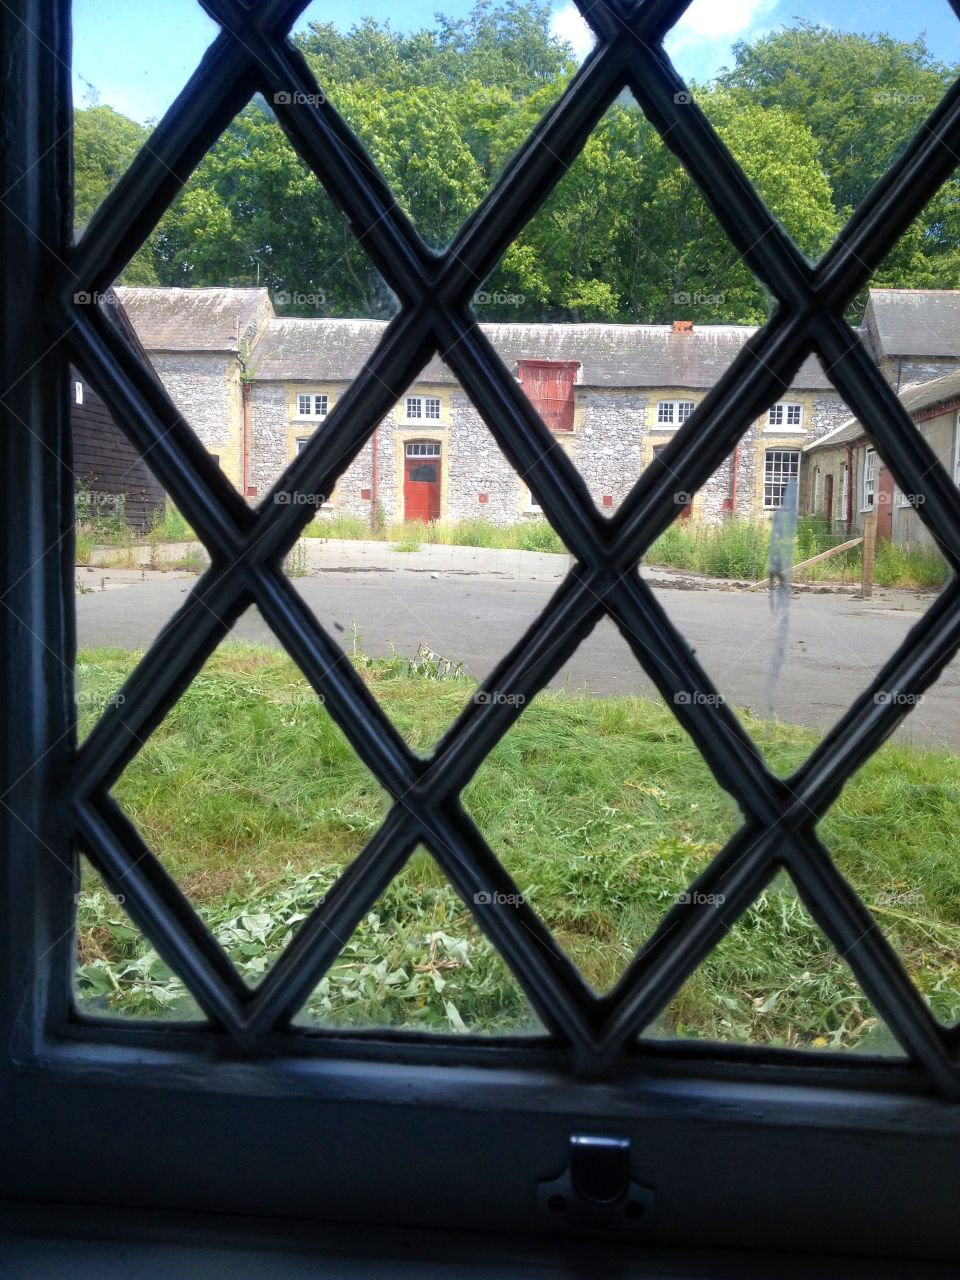 Windows around the world. Original old latticed window in cottage belonging to Arundel Castle's horse racing stables, in West Sussex.